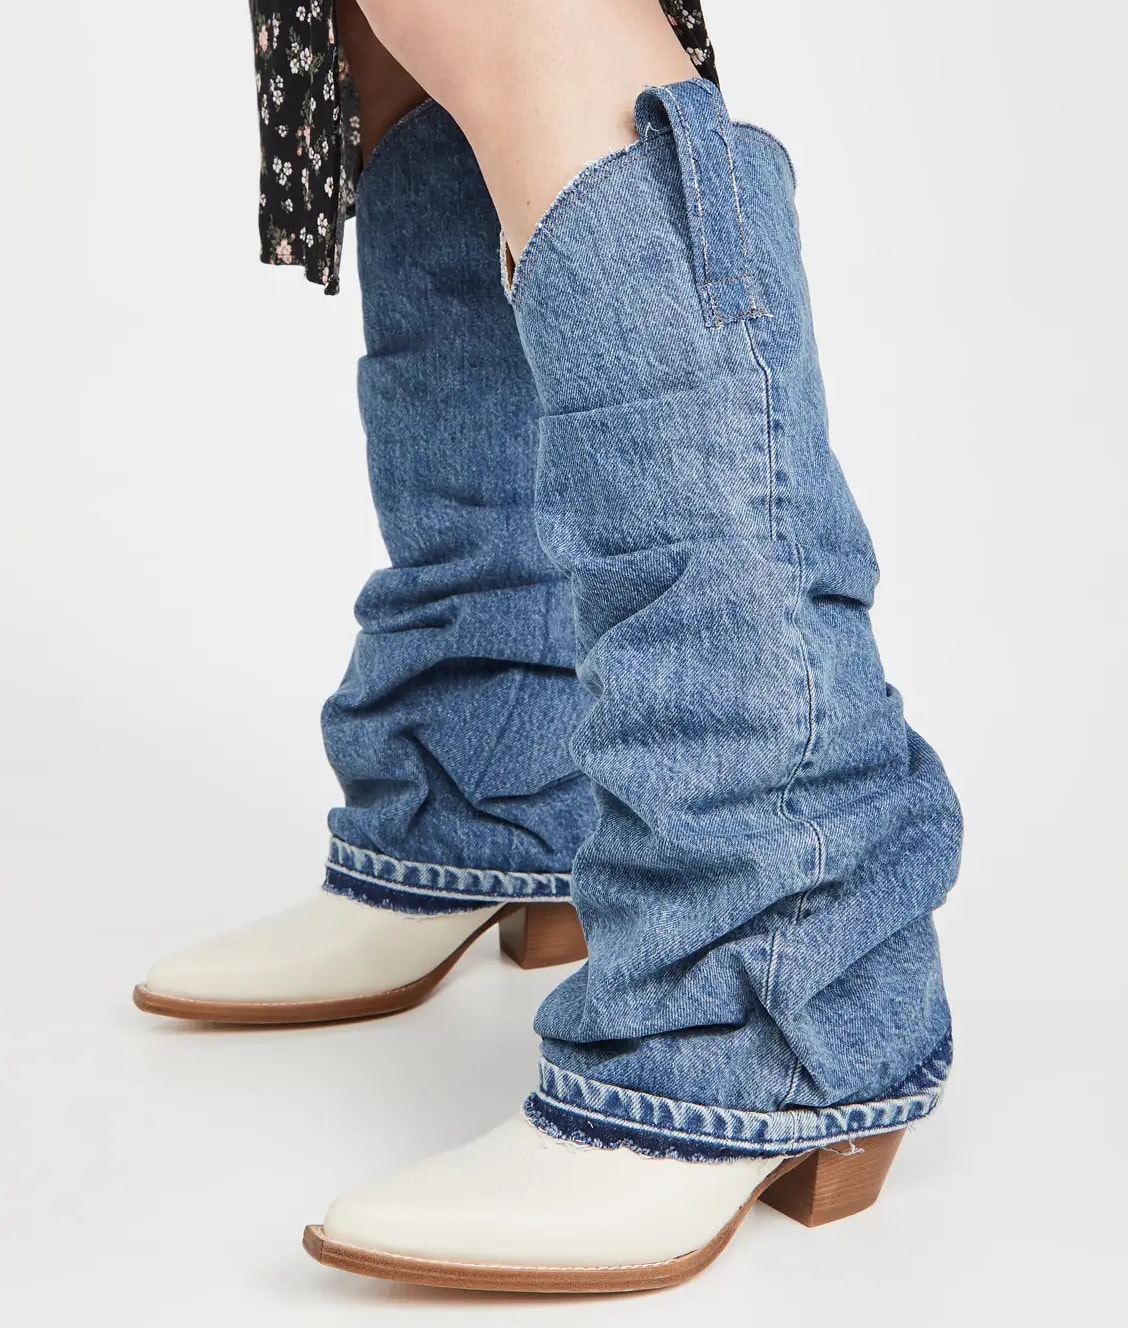 Slouchy denim overlay boots from R13 with pull tabs at the sides